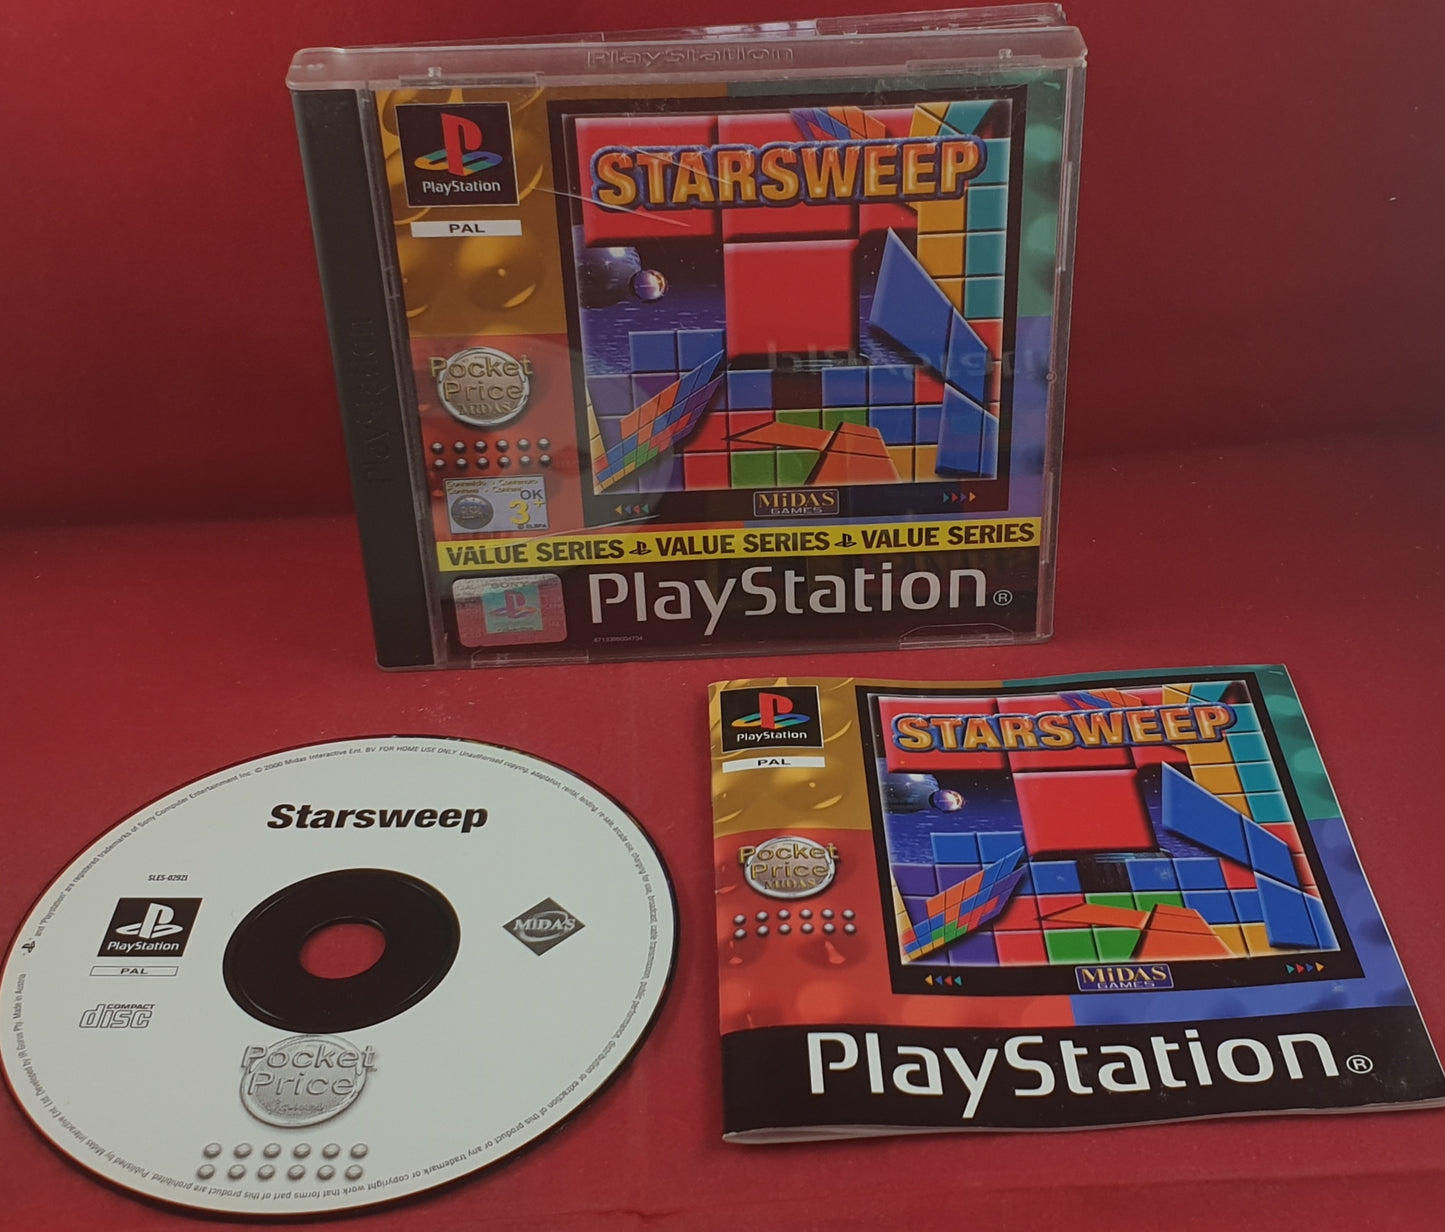 Starsweep Sony Playstation 1 (PS1) Game